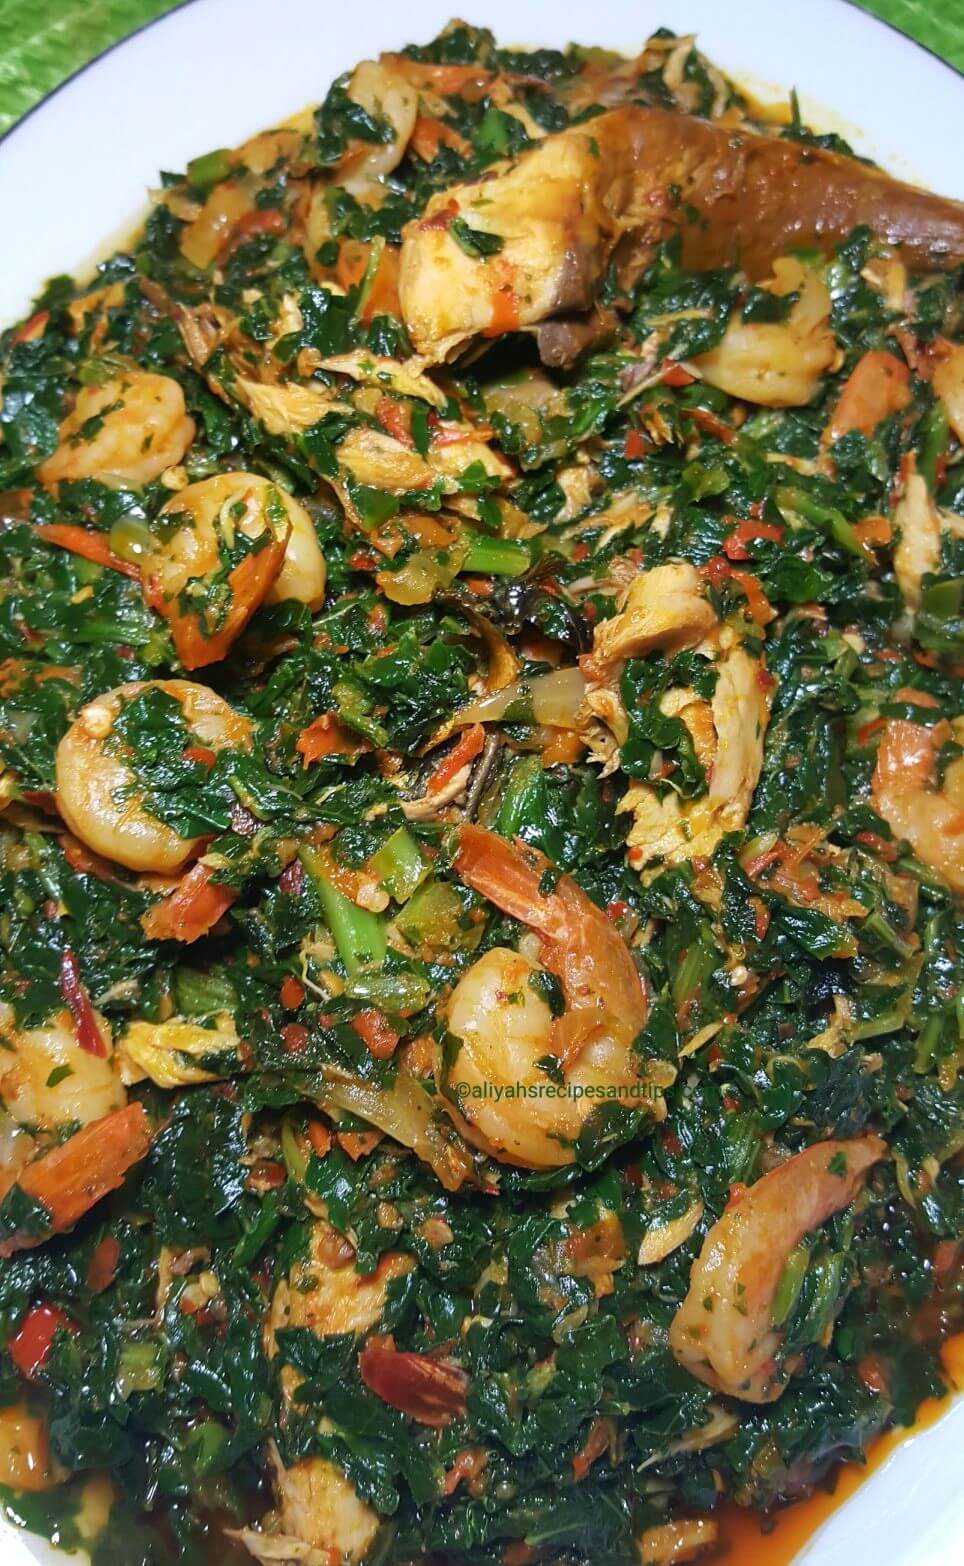 efo riro pounded yam, efo riro, food, kale, spinach, rice, Igbo soup, Yoruba soup, South east Nigeria soup, Hausa soup, Ibo soup, African soup, egusi, igerian efo riro, African efo riro, Yoruba efo riro, Yoruba, eba, Spinach and kale, vegetable soup, vegetable stew, Nigerian, African